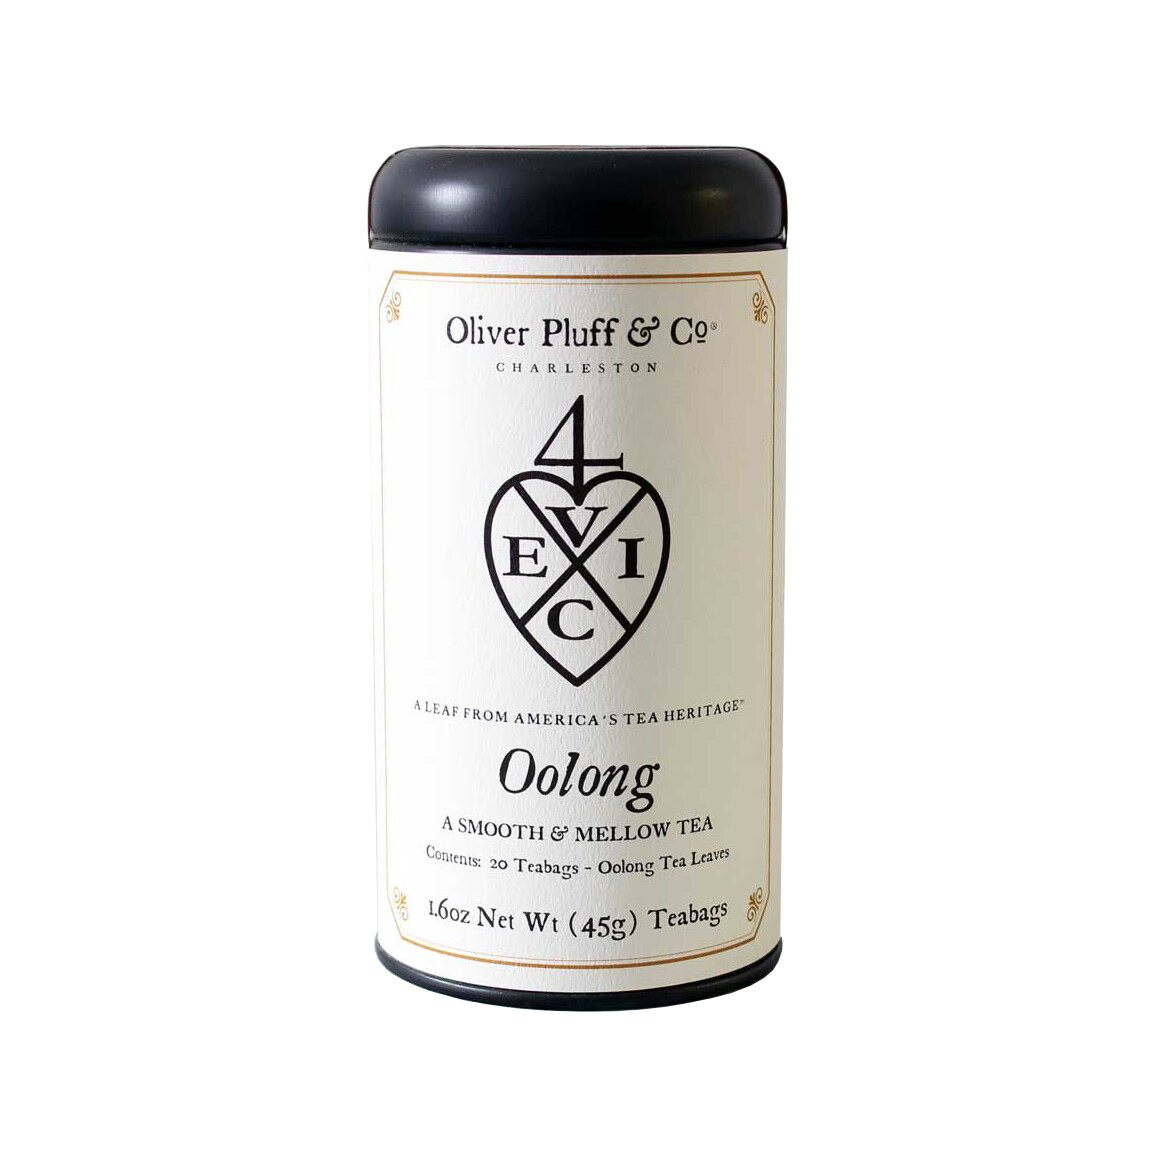 Oliver Pluff & Co Oolong Tea 20 Teabags